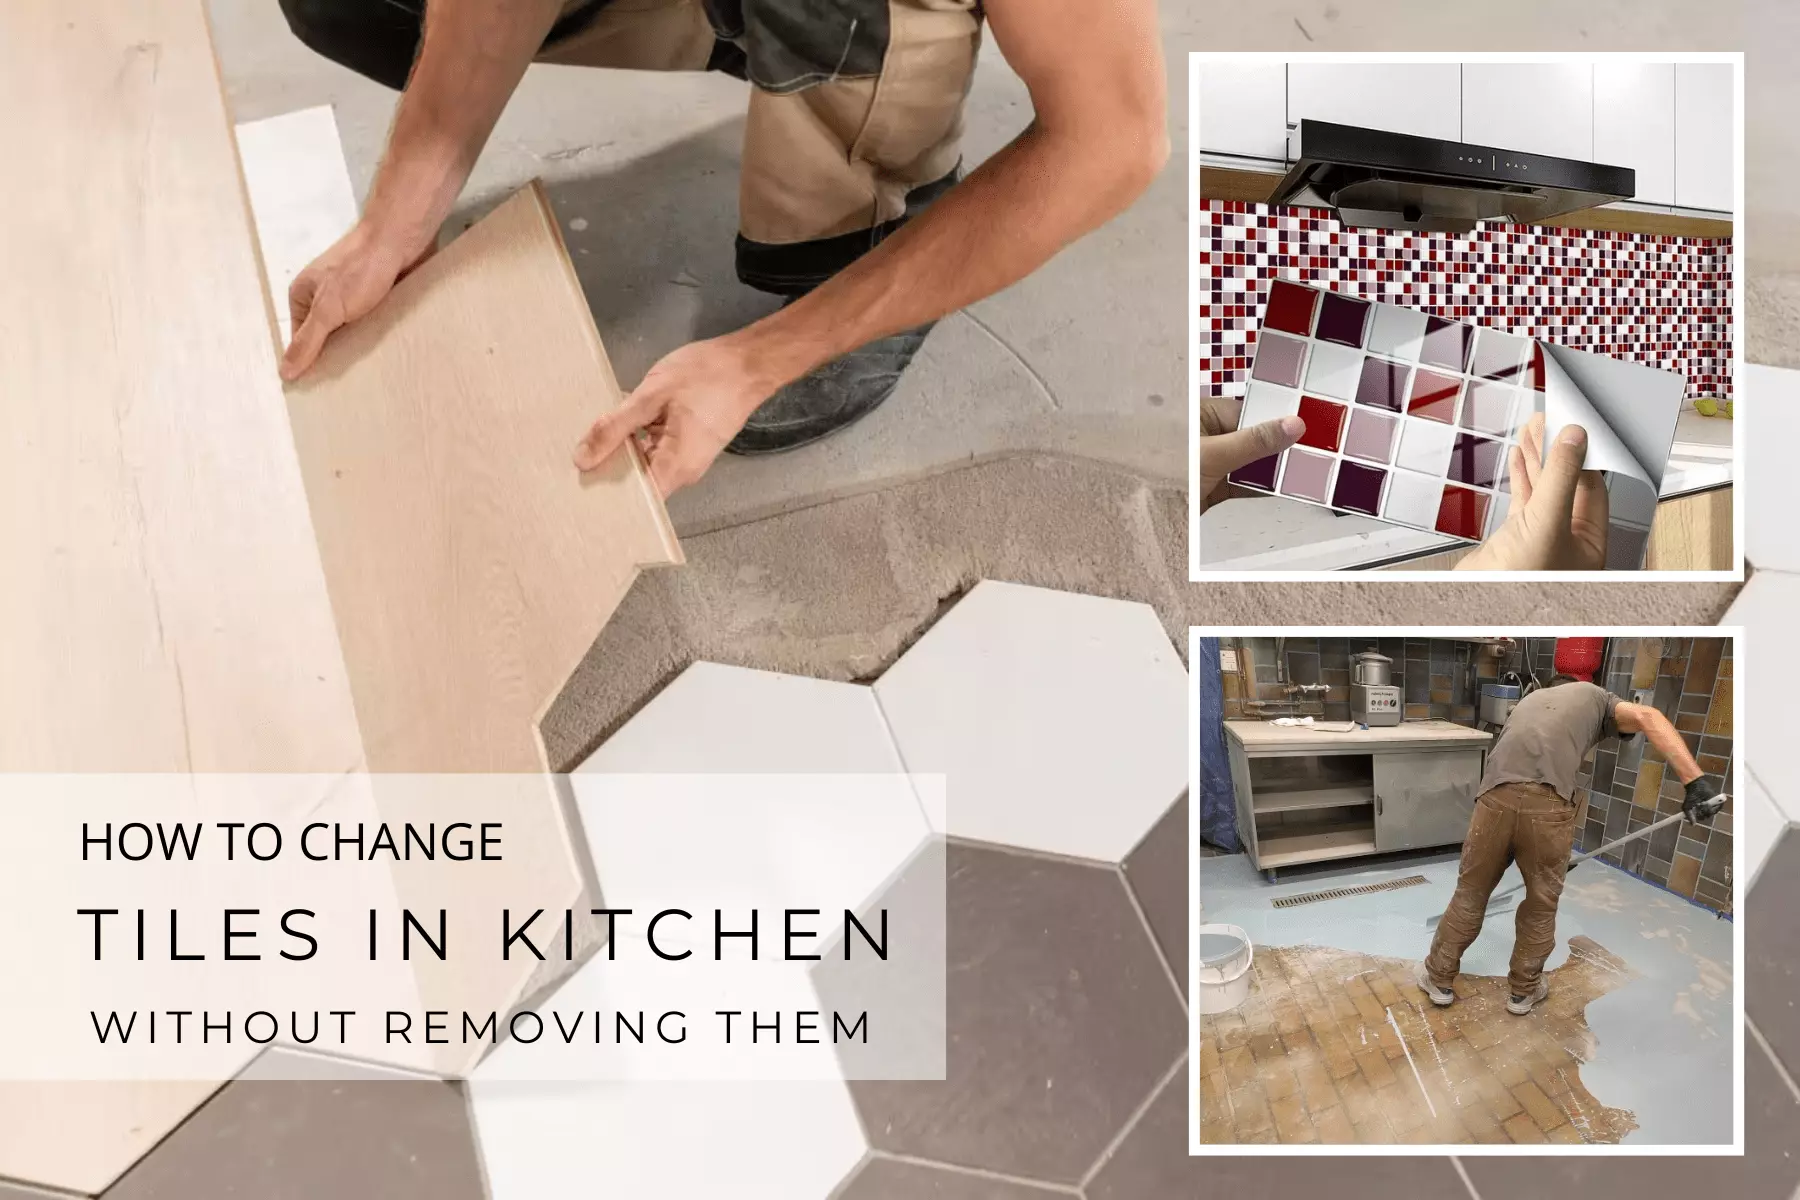 How to change tiles in kitchen without removing them